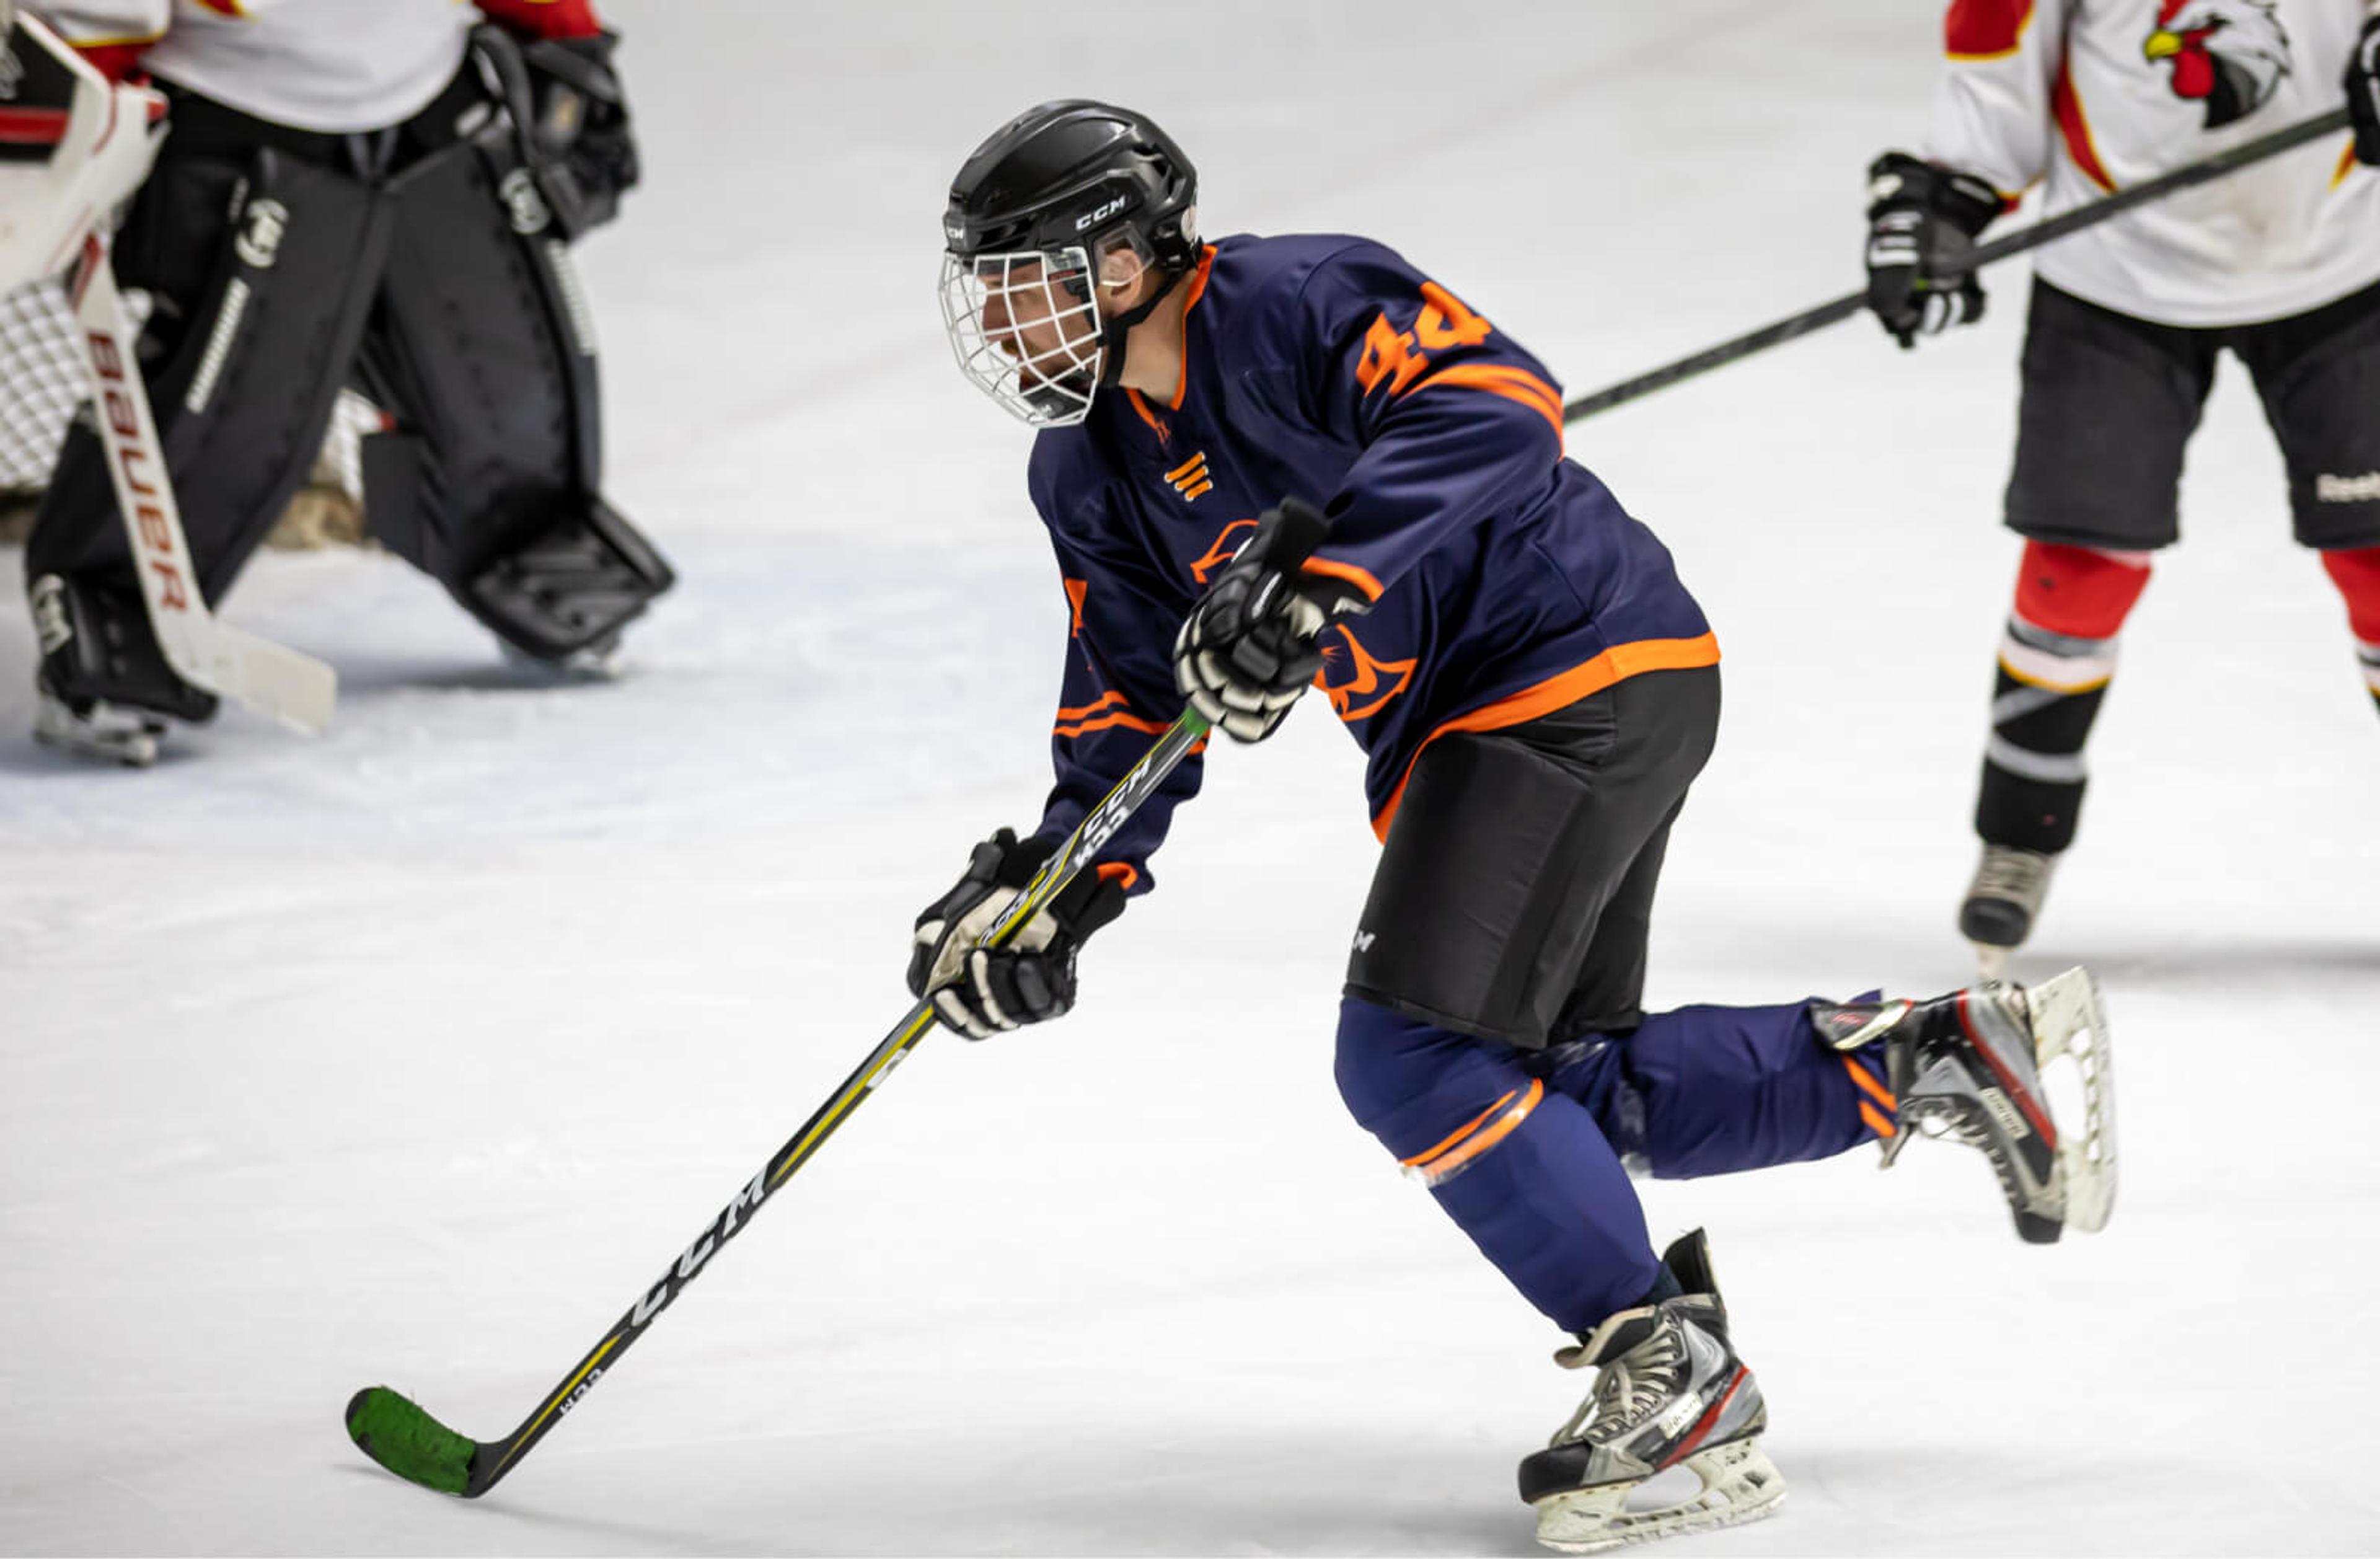 A hockey player in a navy and orange uniform.